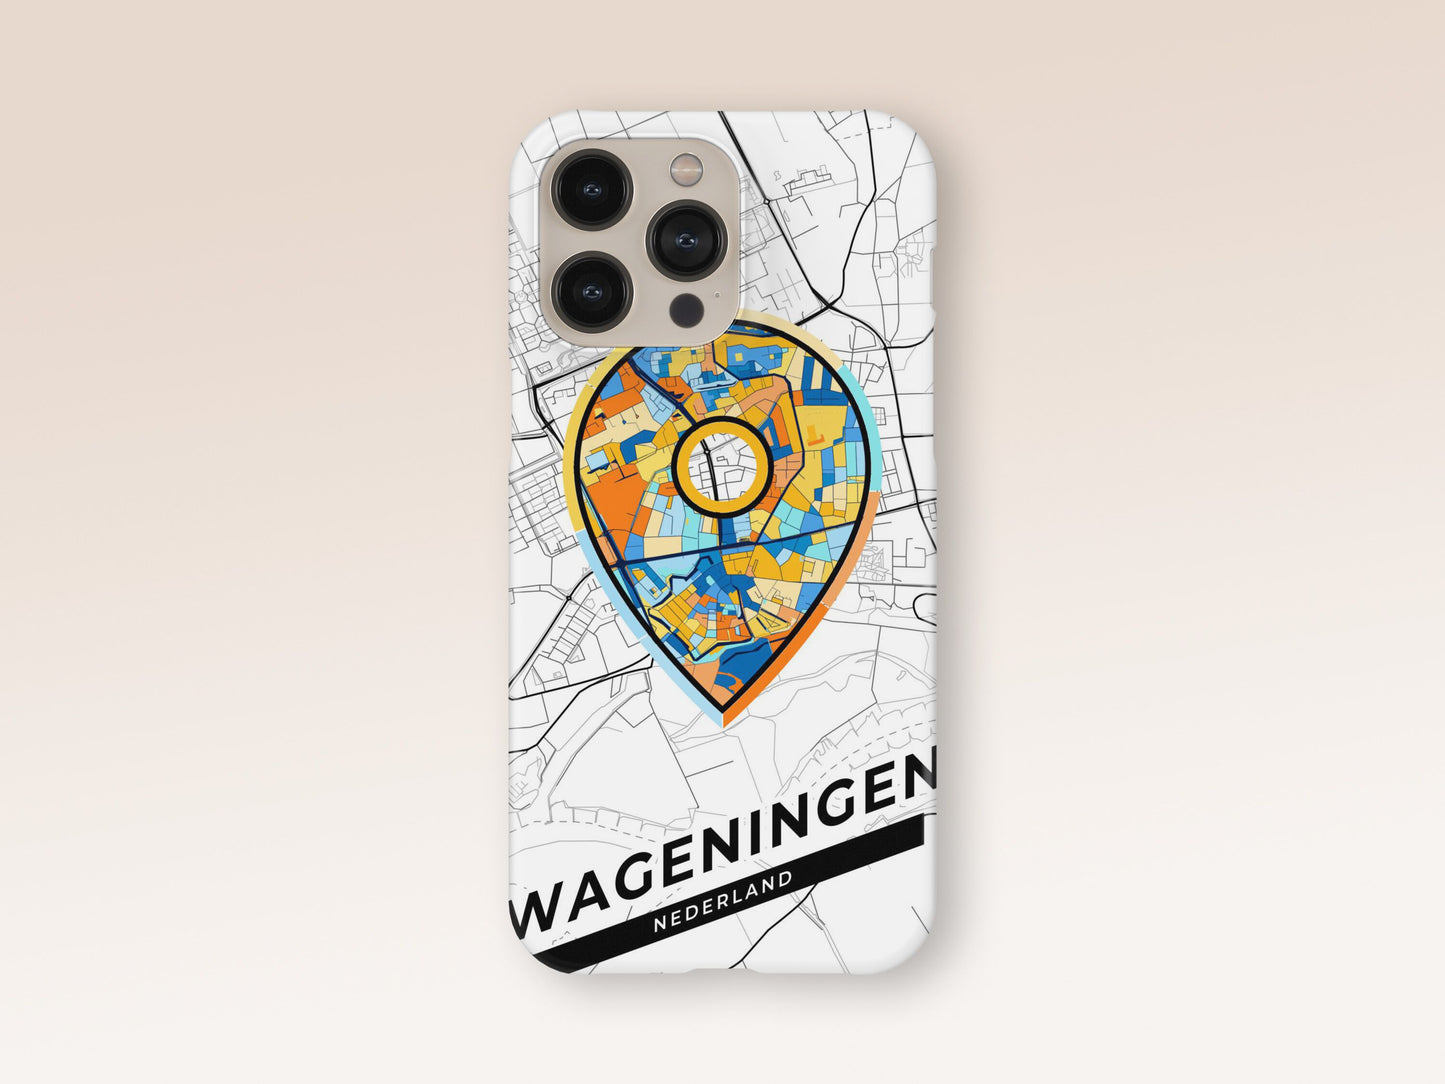 Wageningen Netherlands slim phone case with colorful icon 1